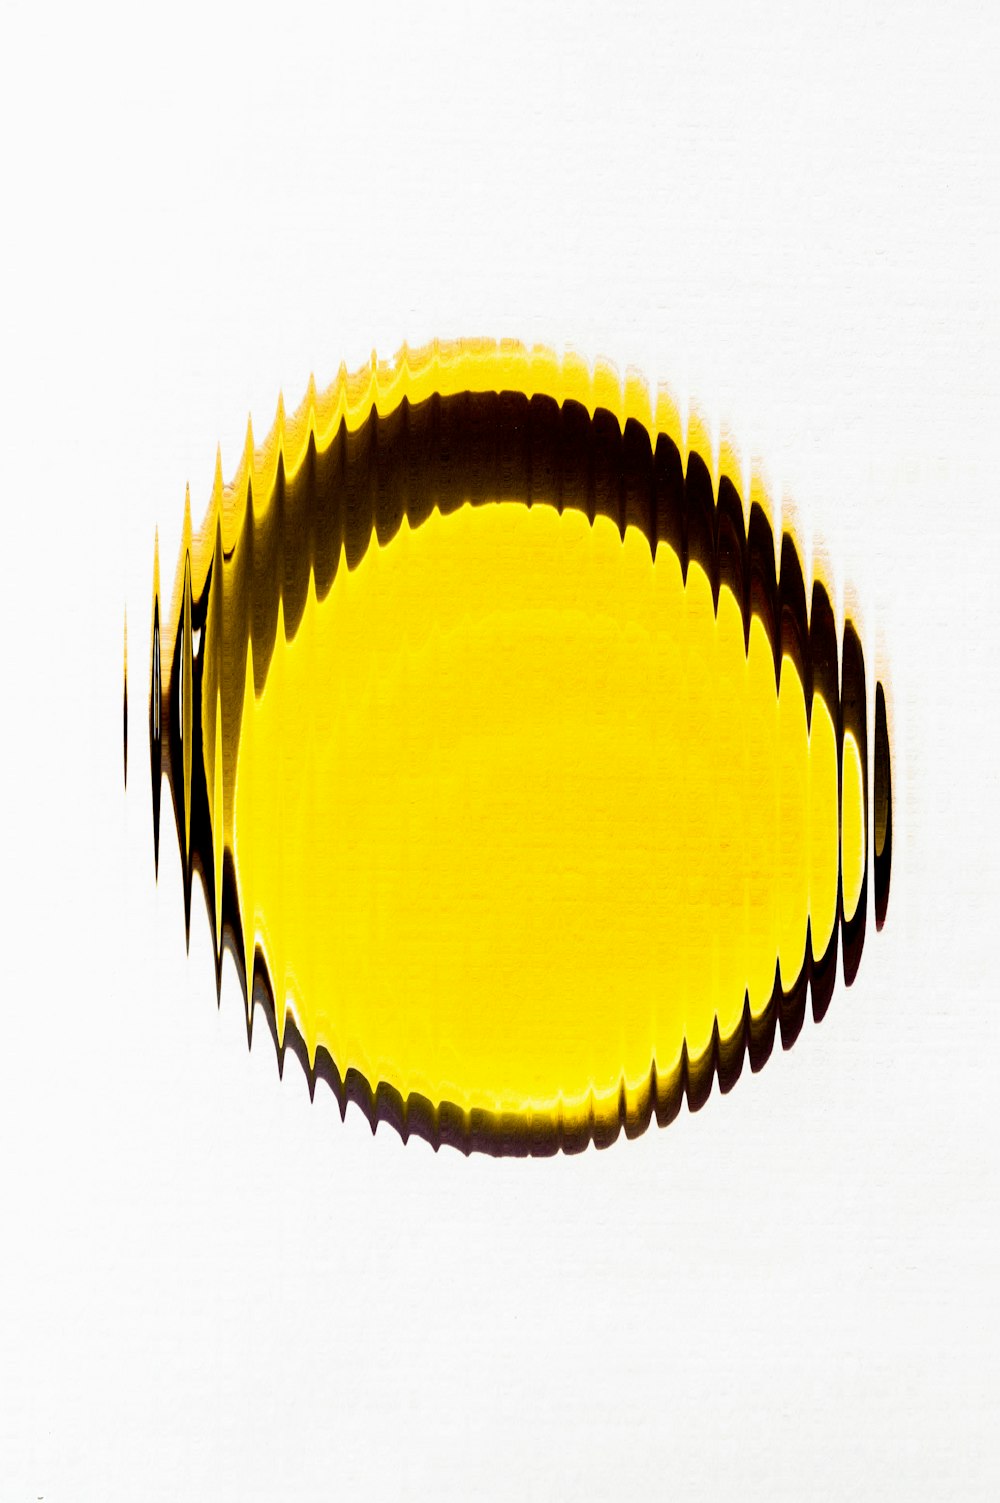 a close up of a yellow object on a white surface